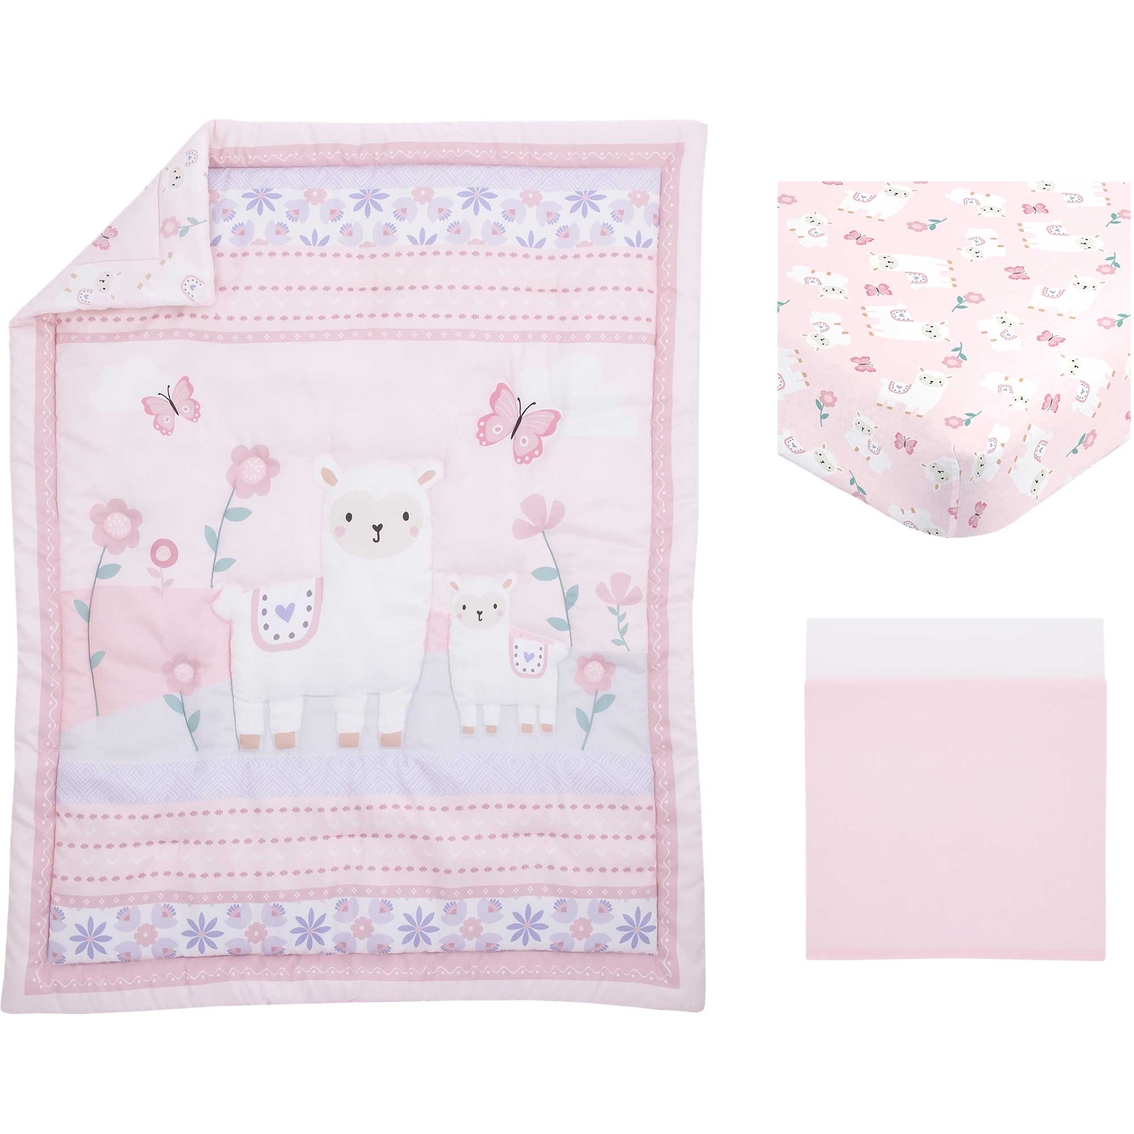 Little Love by NoJo Sweet Llama and Butterflies Mini Crib 3 pc. Bedding Set - Image 2 of 5